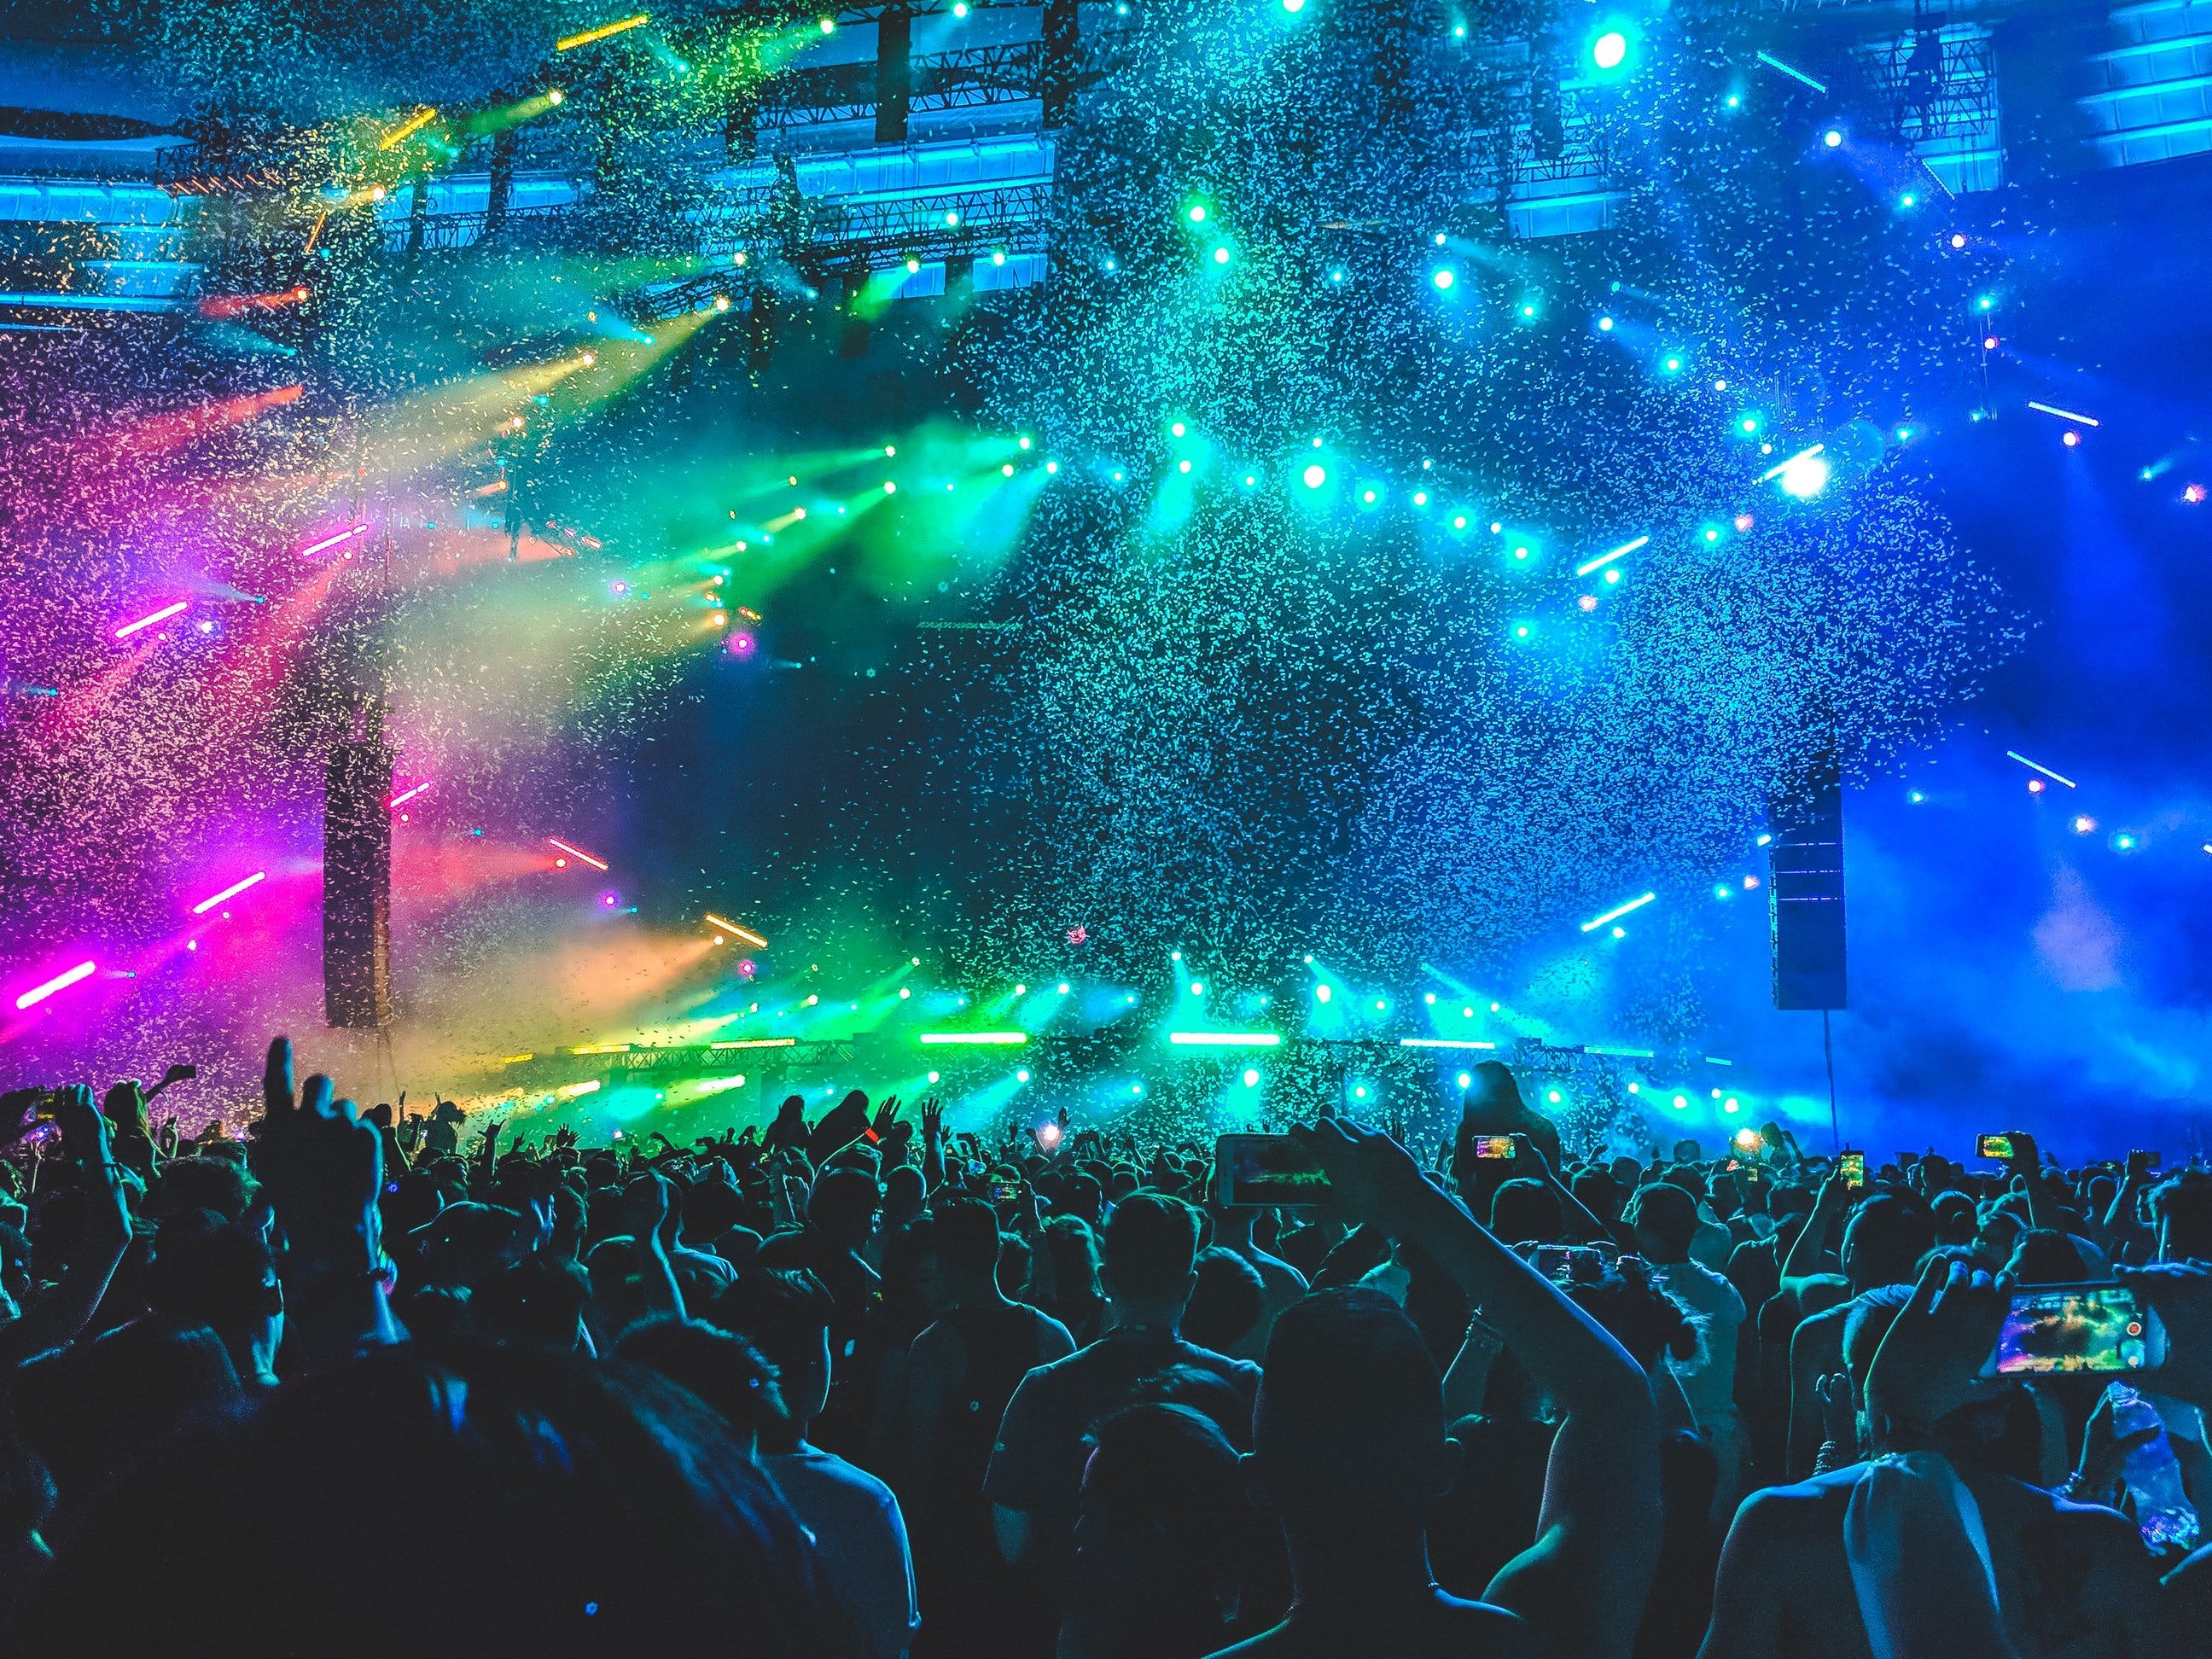 Rave Picture. Download Free Image. Music picture, Concert, Electronic dance music